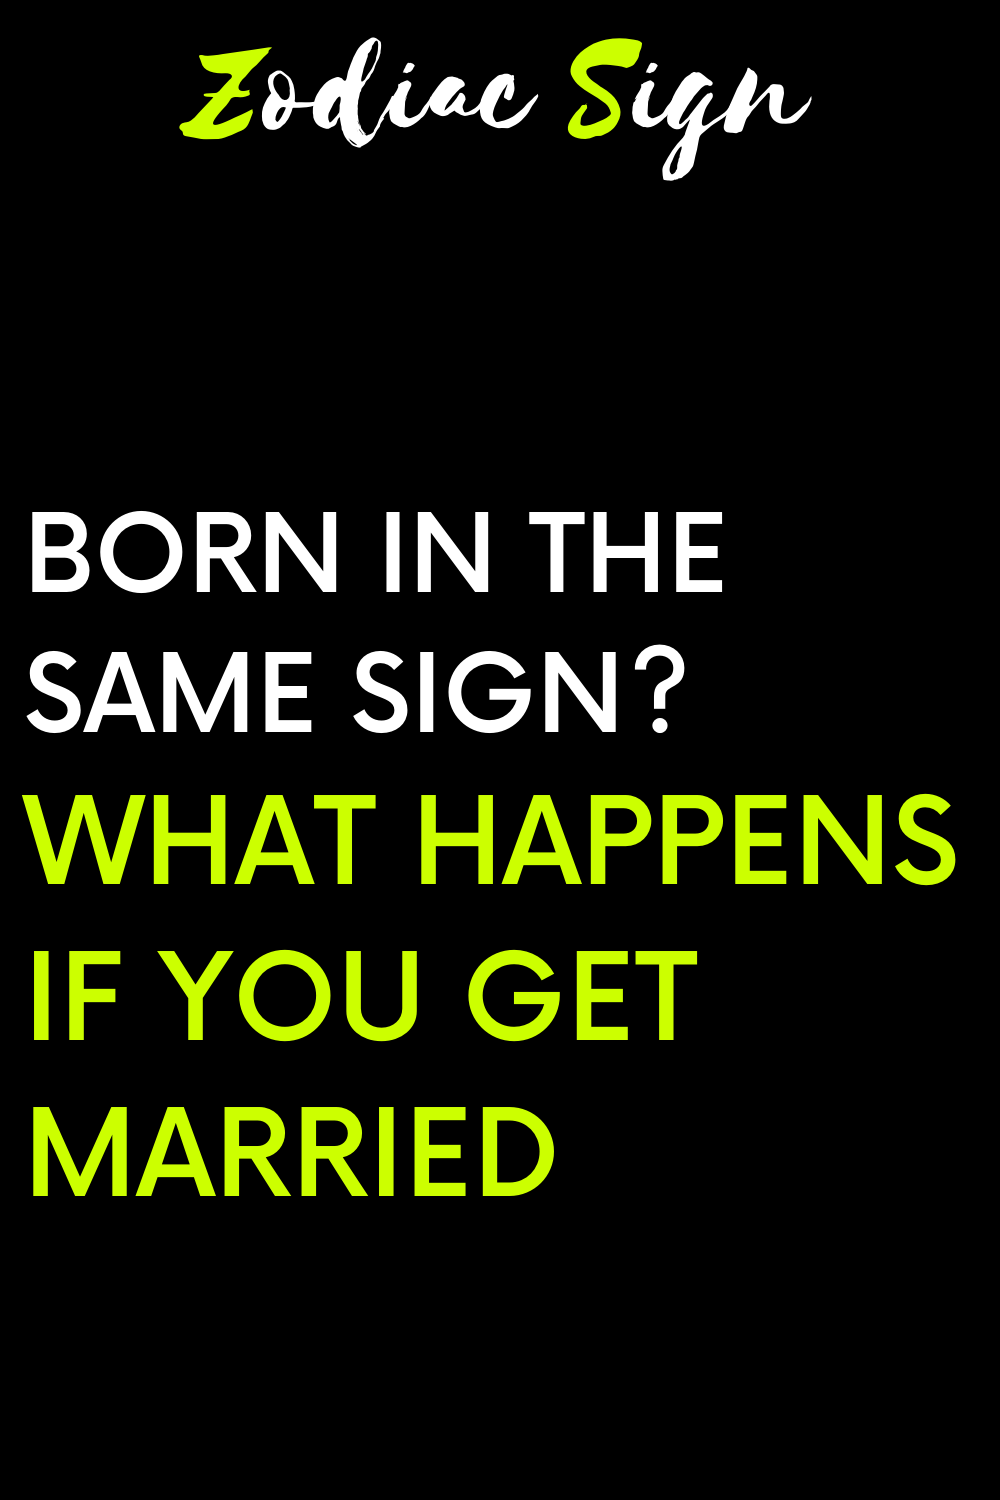 Born in the same sign? What happens if you get married